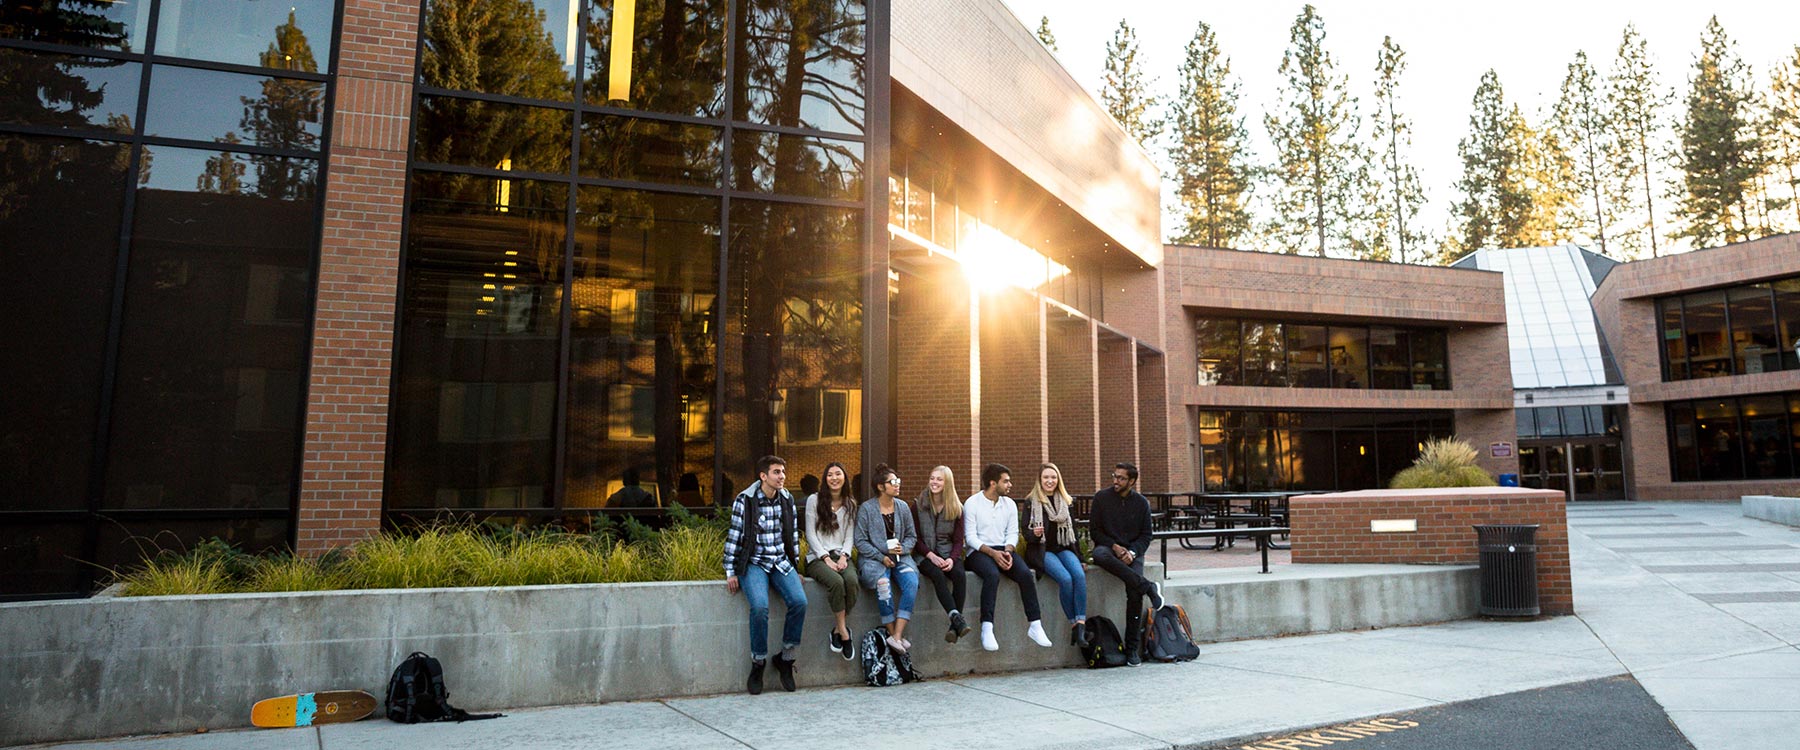 Students sit on a wall outside a large, modern academic building. Setting sunlight hits the windows behind them.